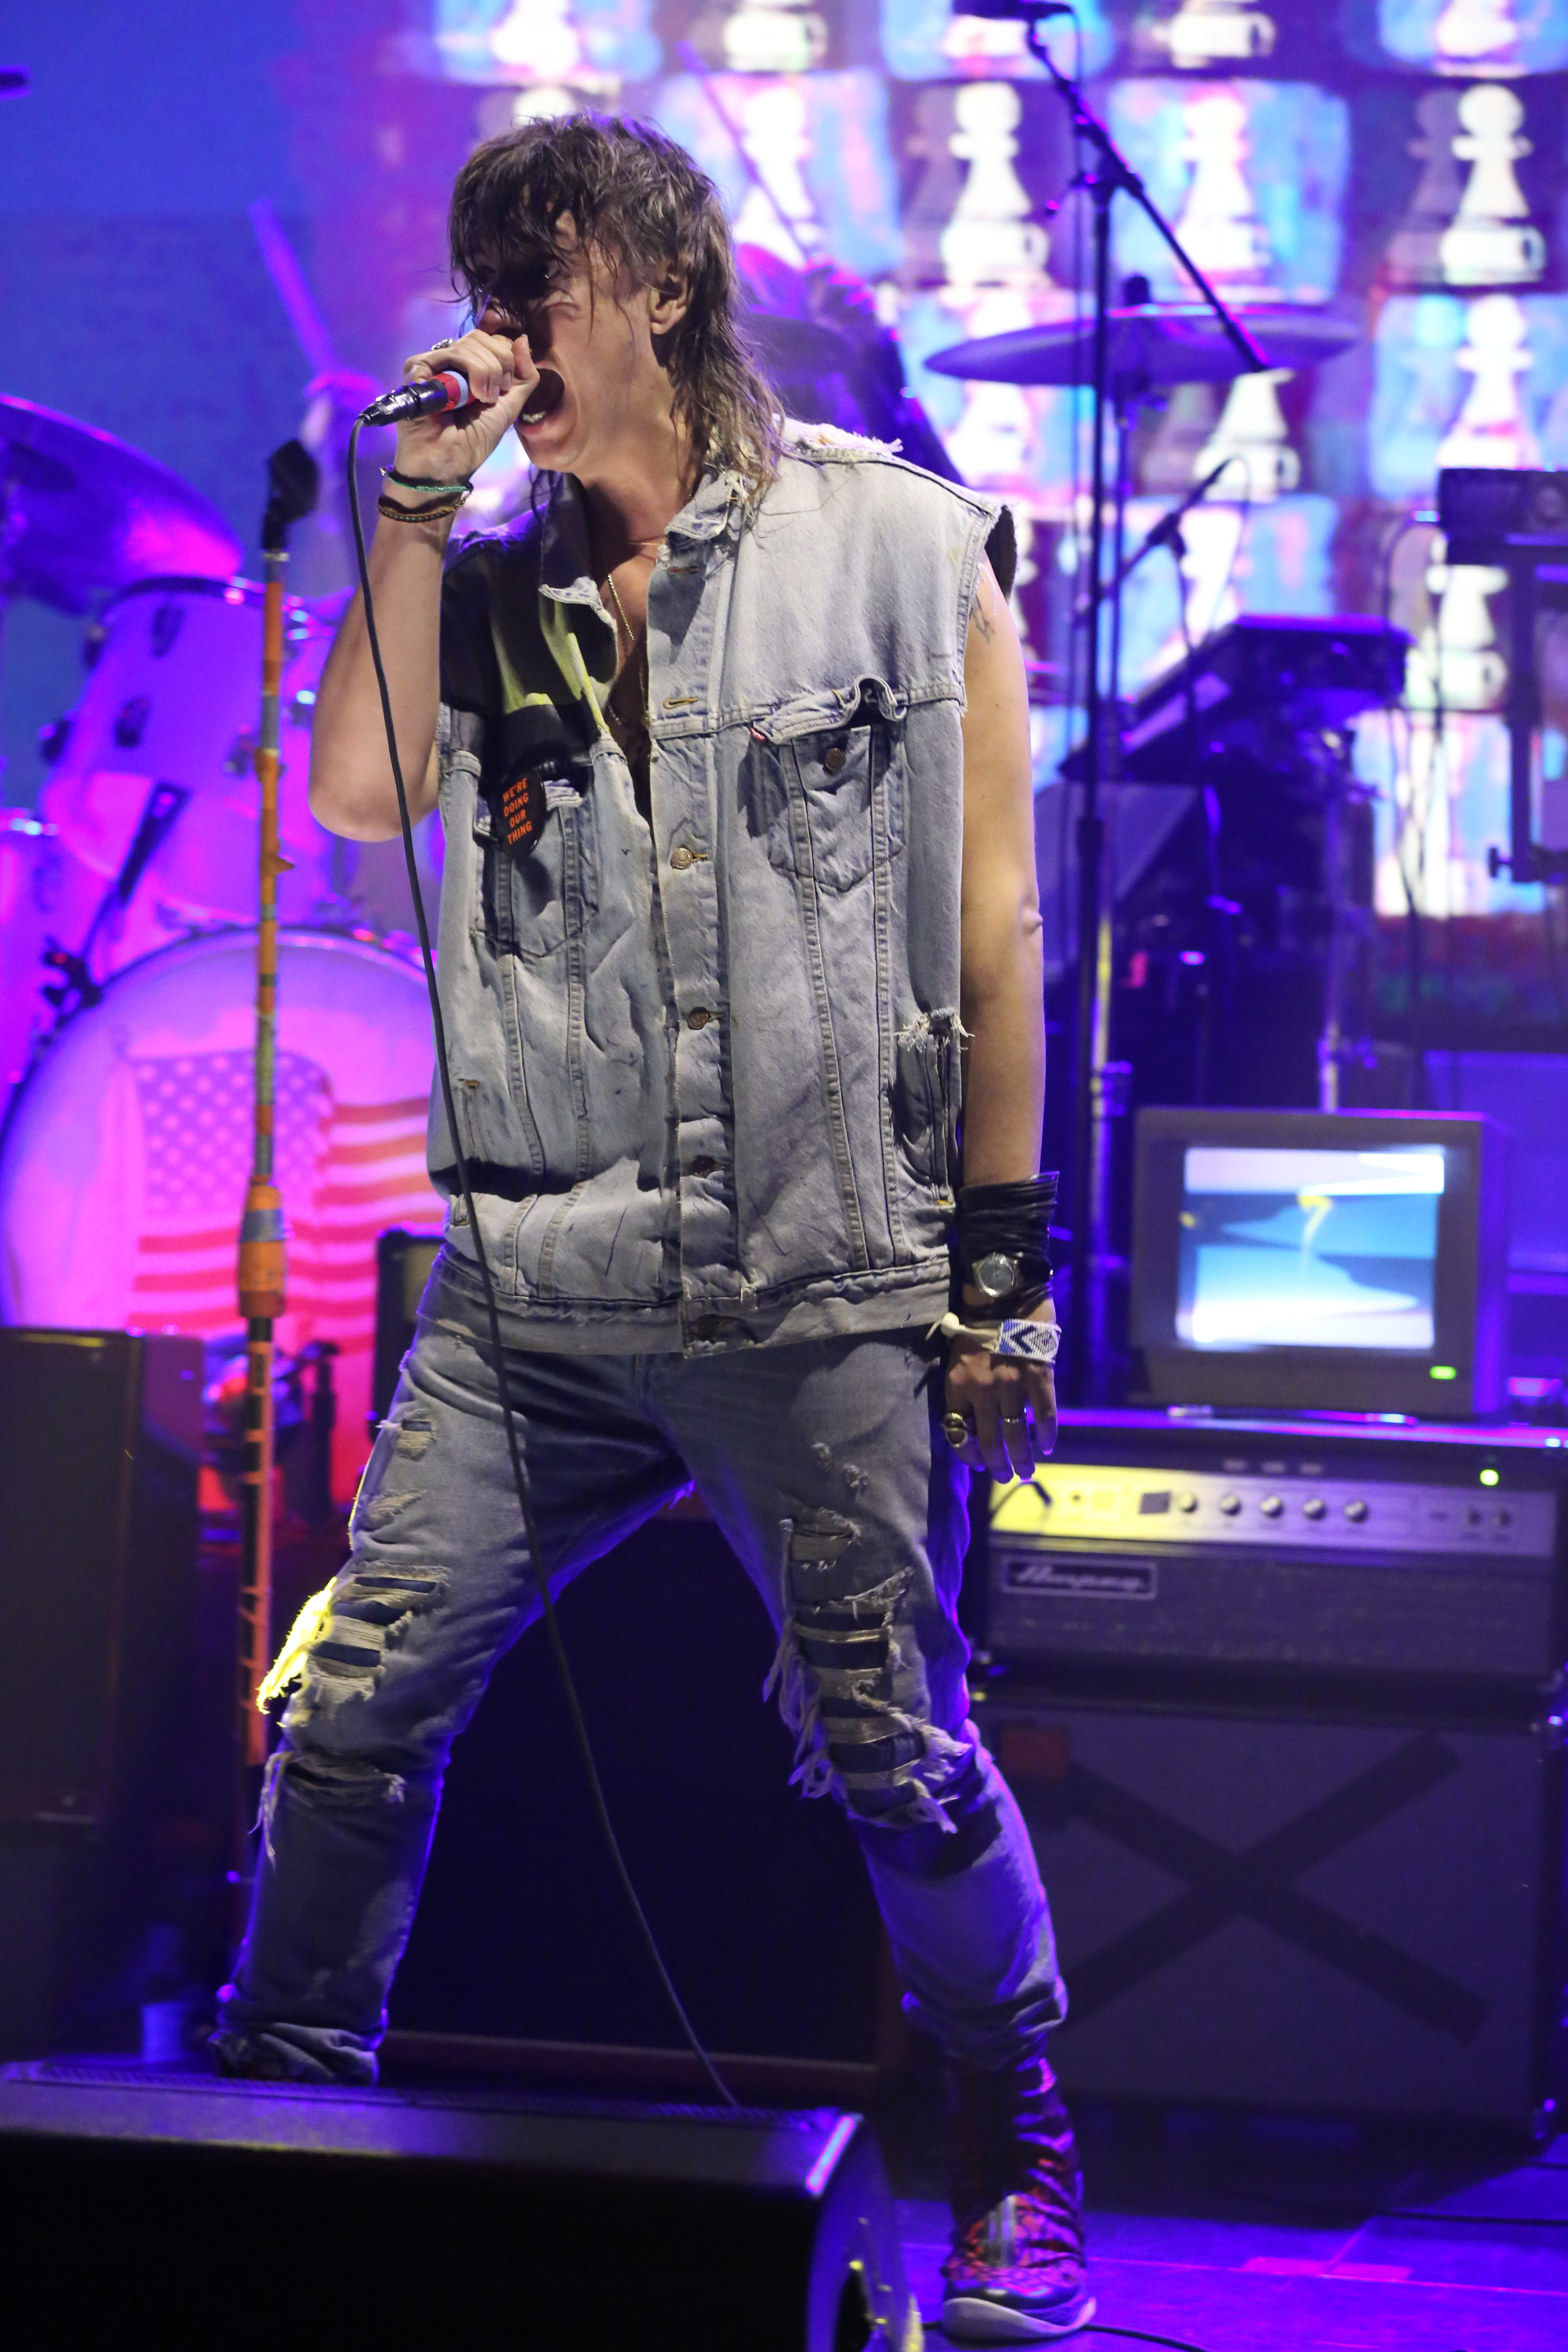 Musical guest Julian Casablancas and The Voidz perform at the Tonight Show on September 23, 2014.